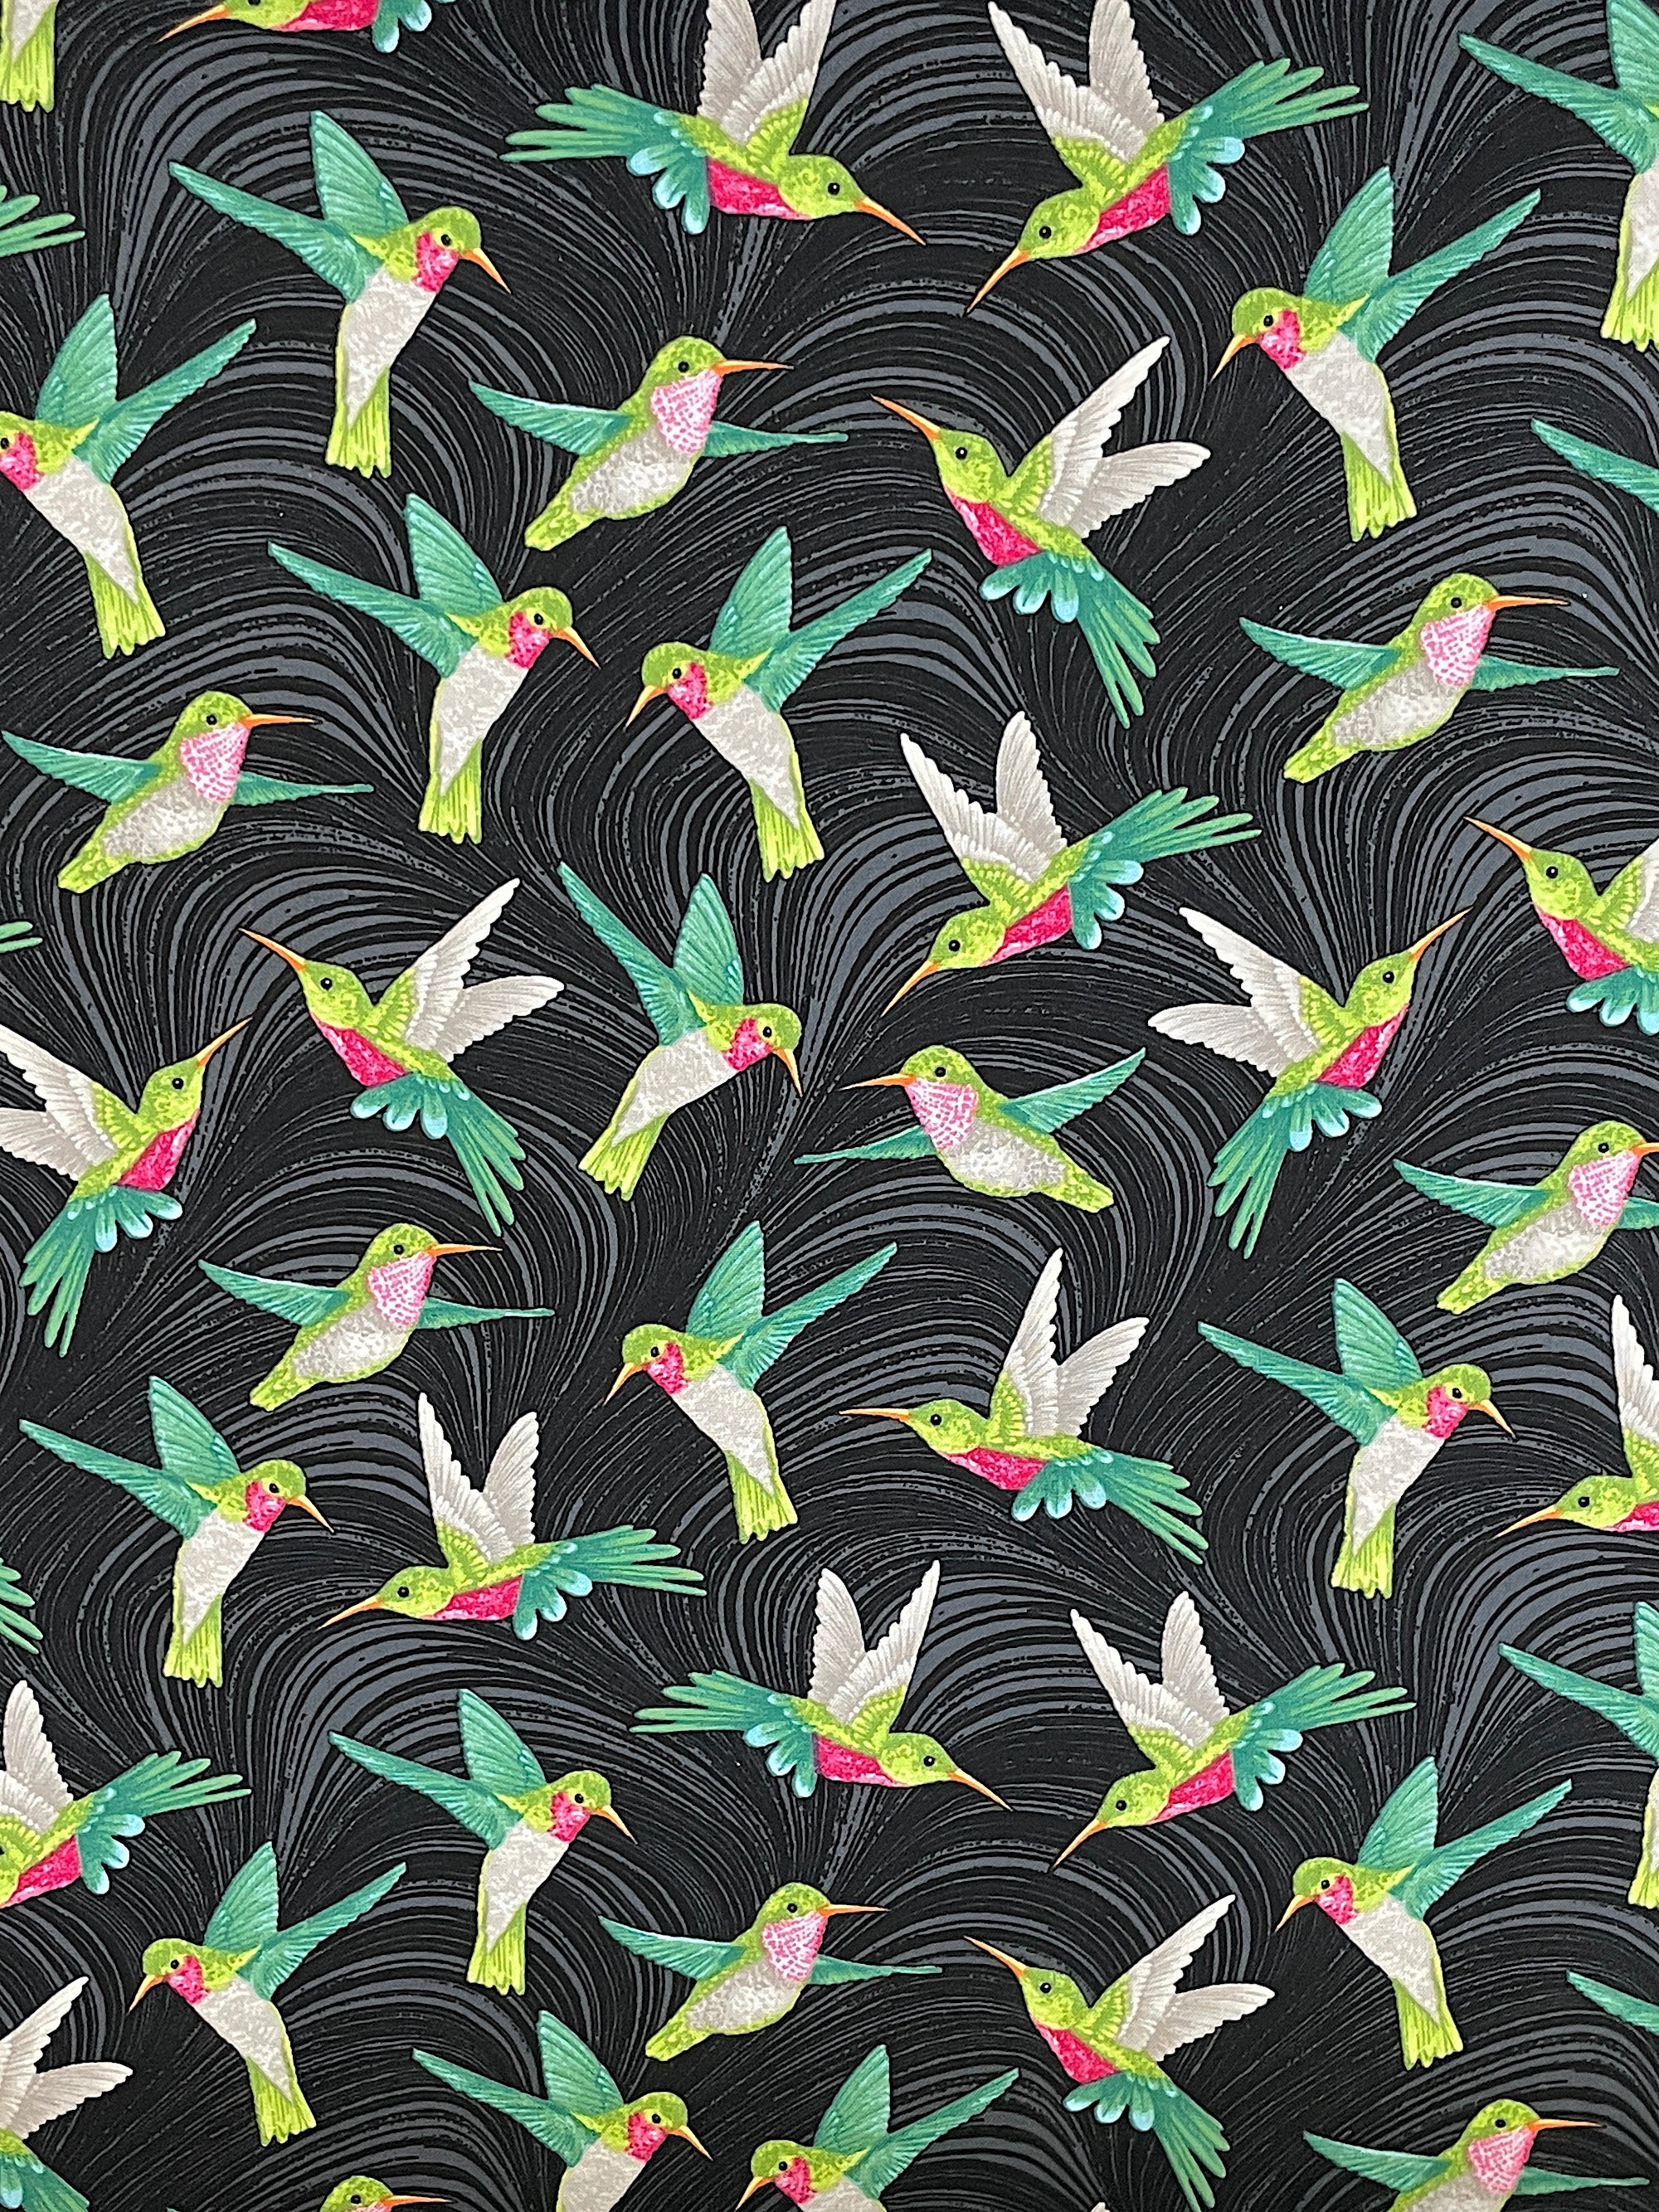 Black cotton fabric covered with hummingbirds that are green, pink and grey.